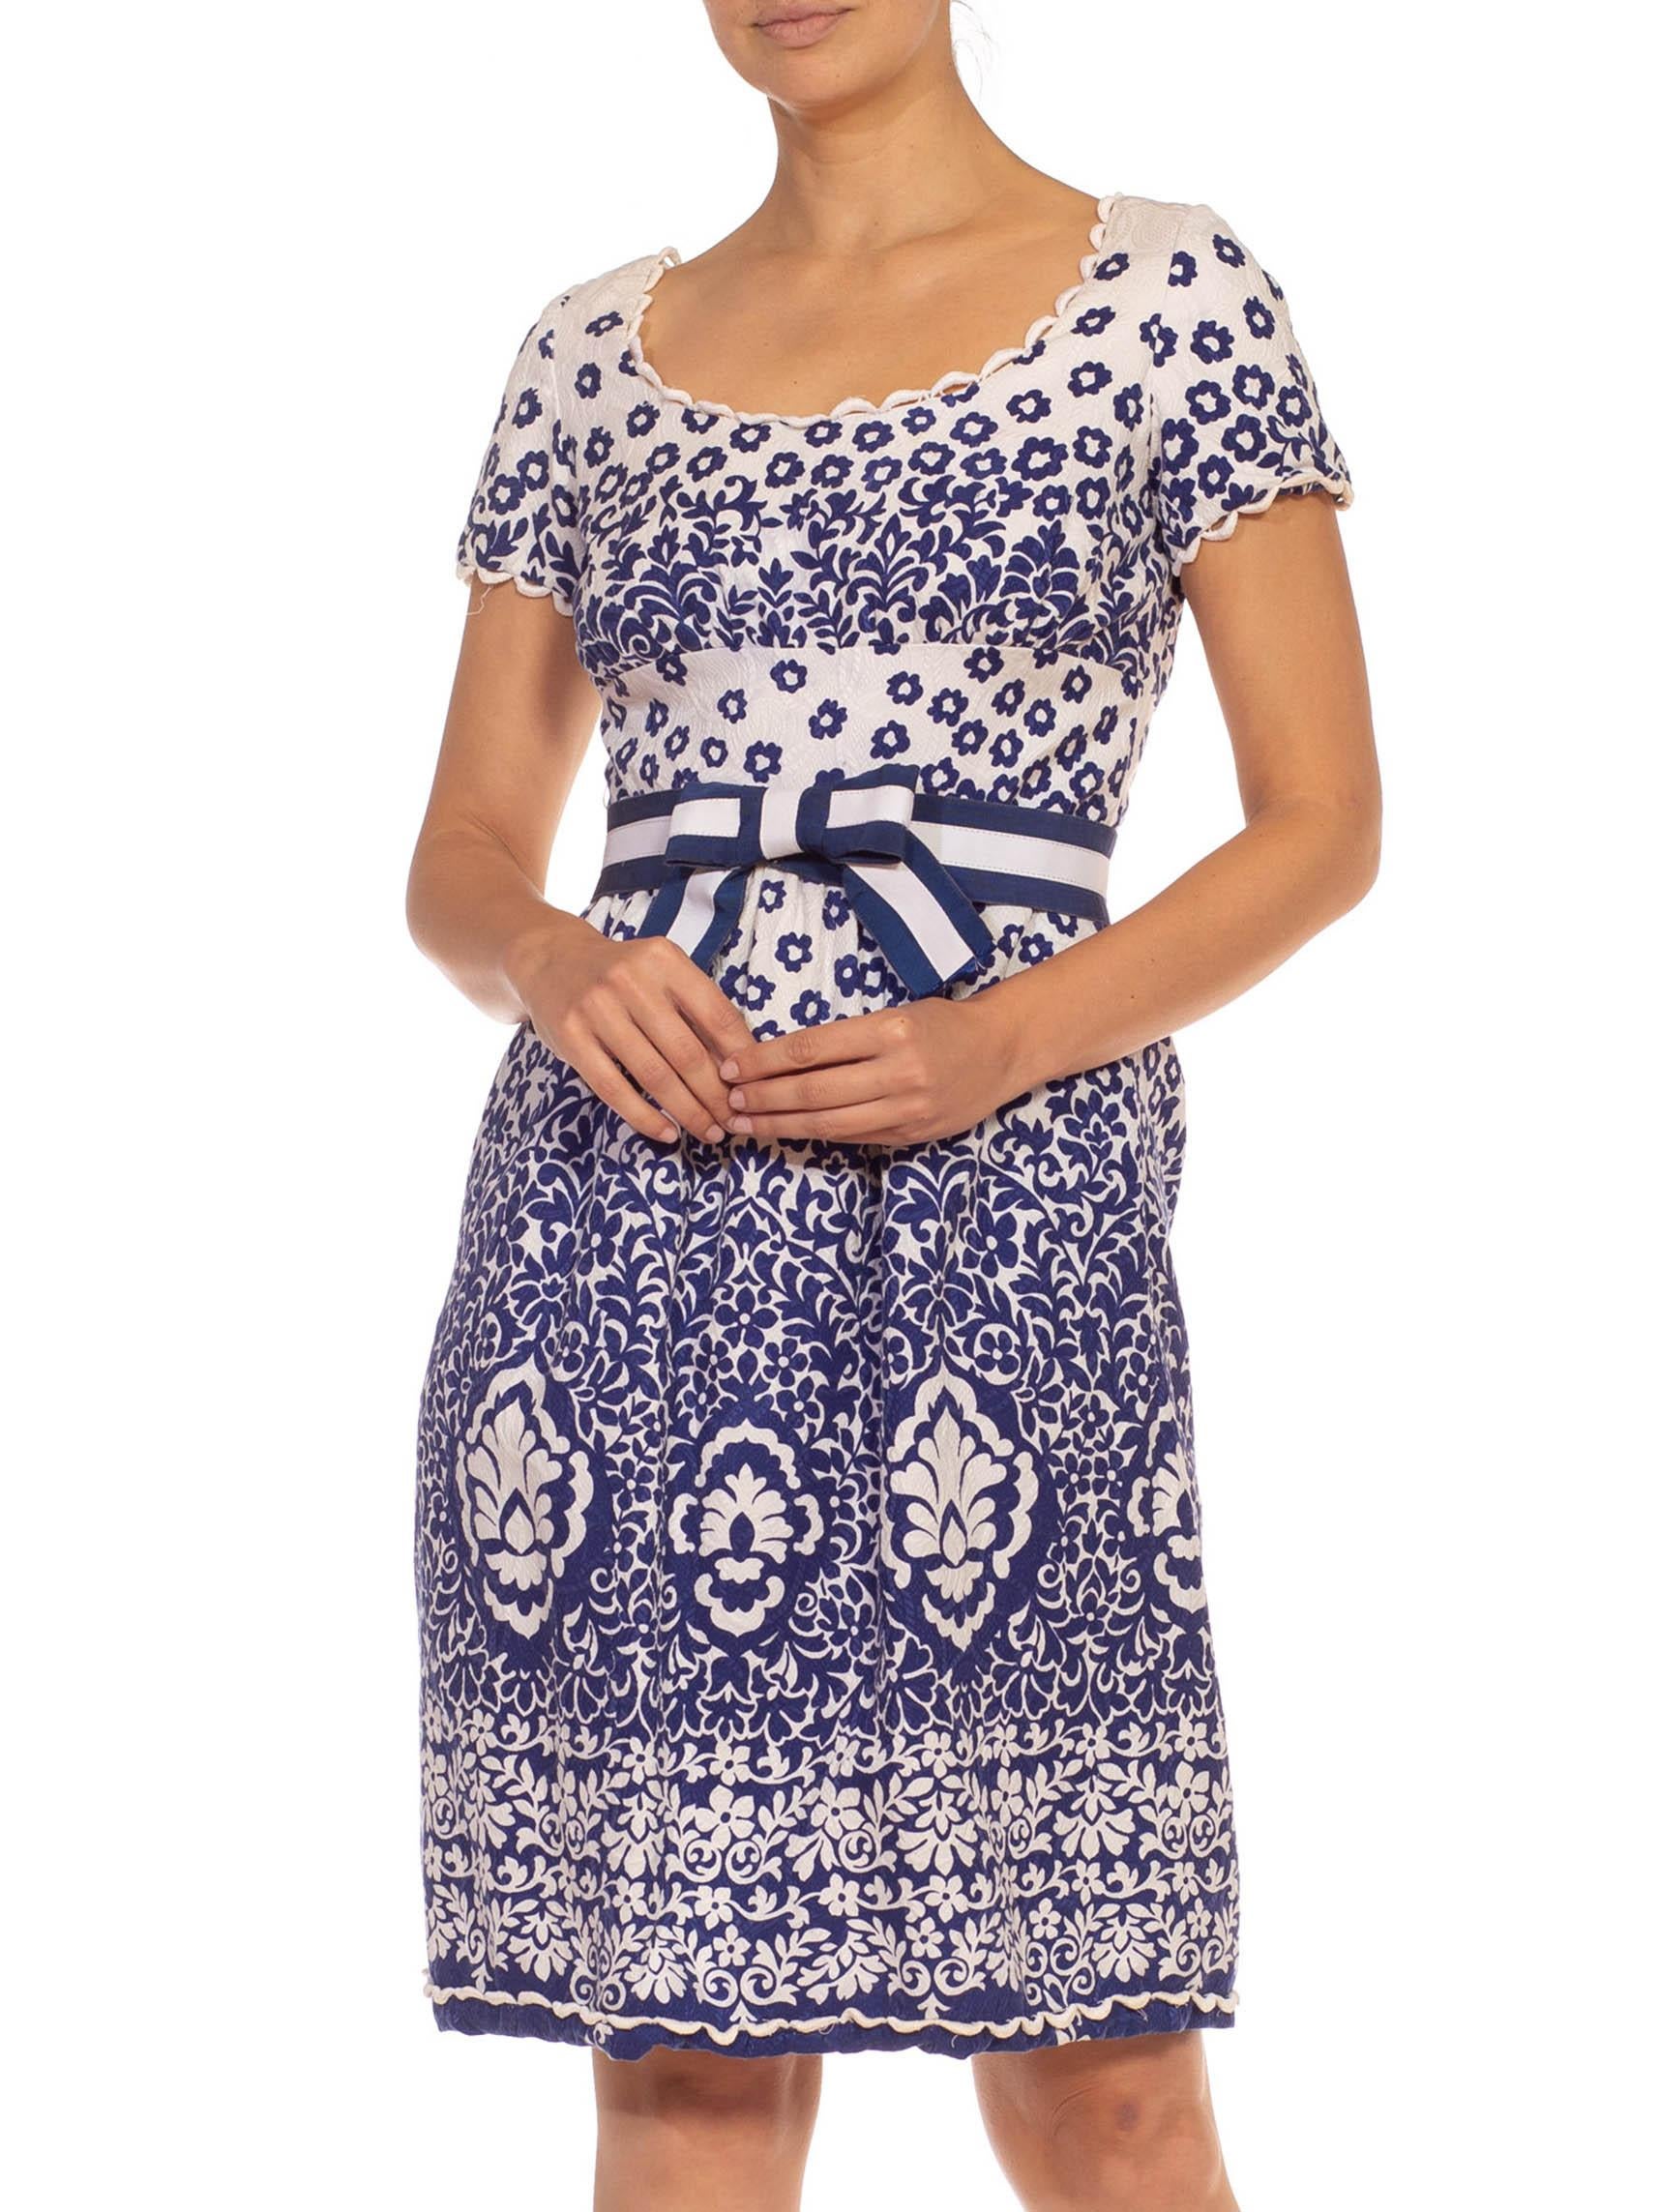 1960S Oscar De La Renta Navy Blue & White Floral Mod Cocktail Dress In Excellent Condition For Sale In New York, NY